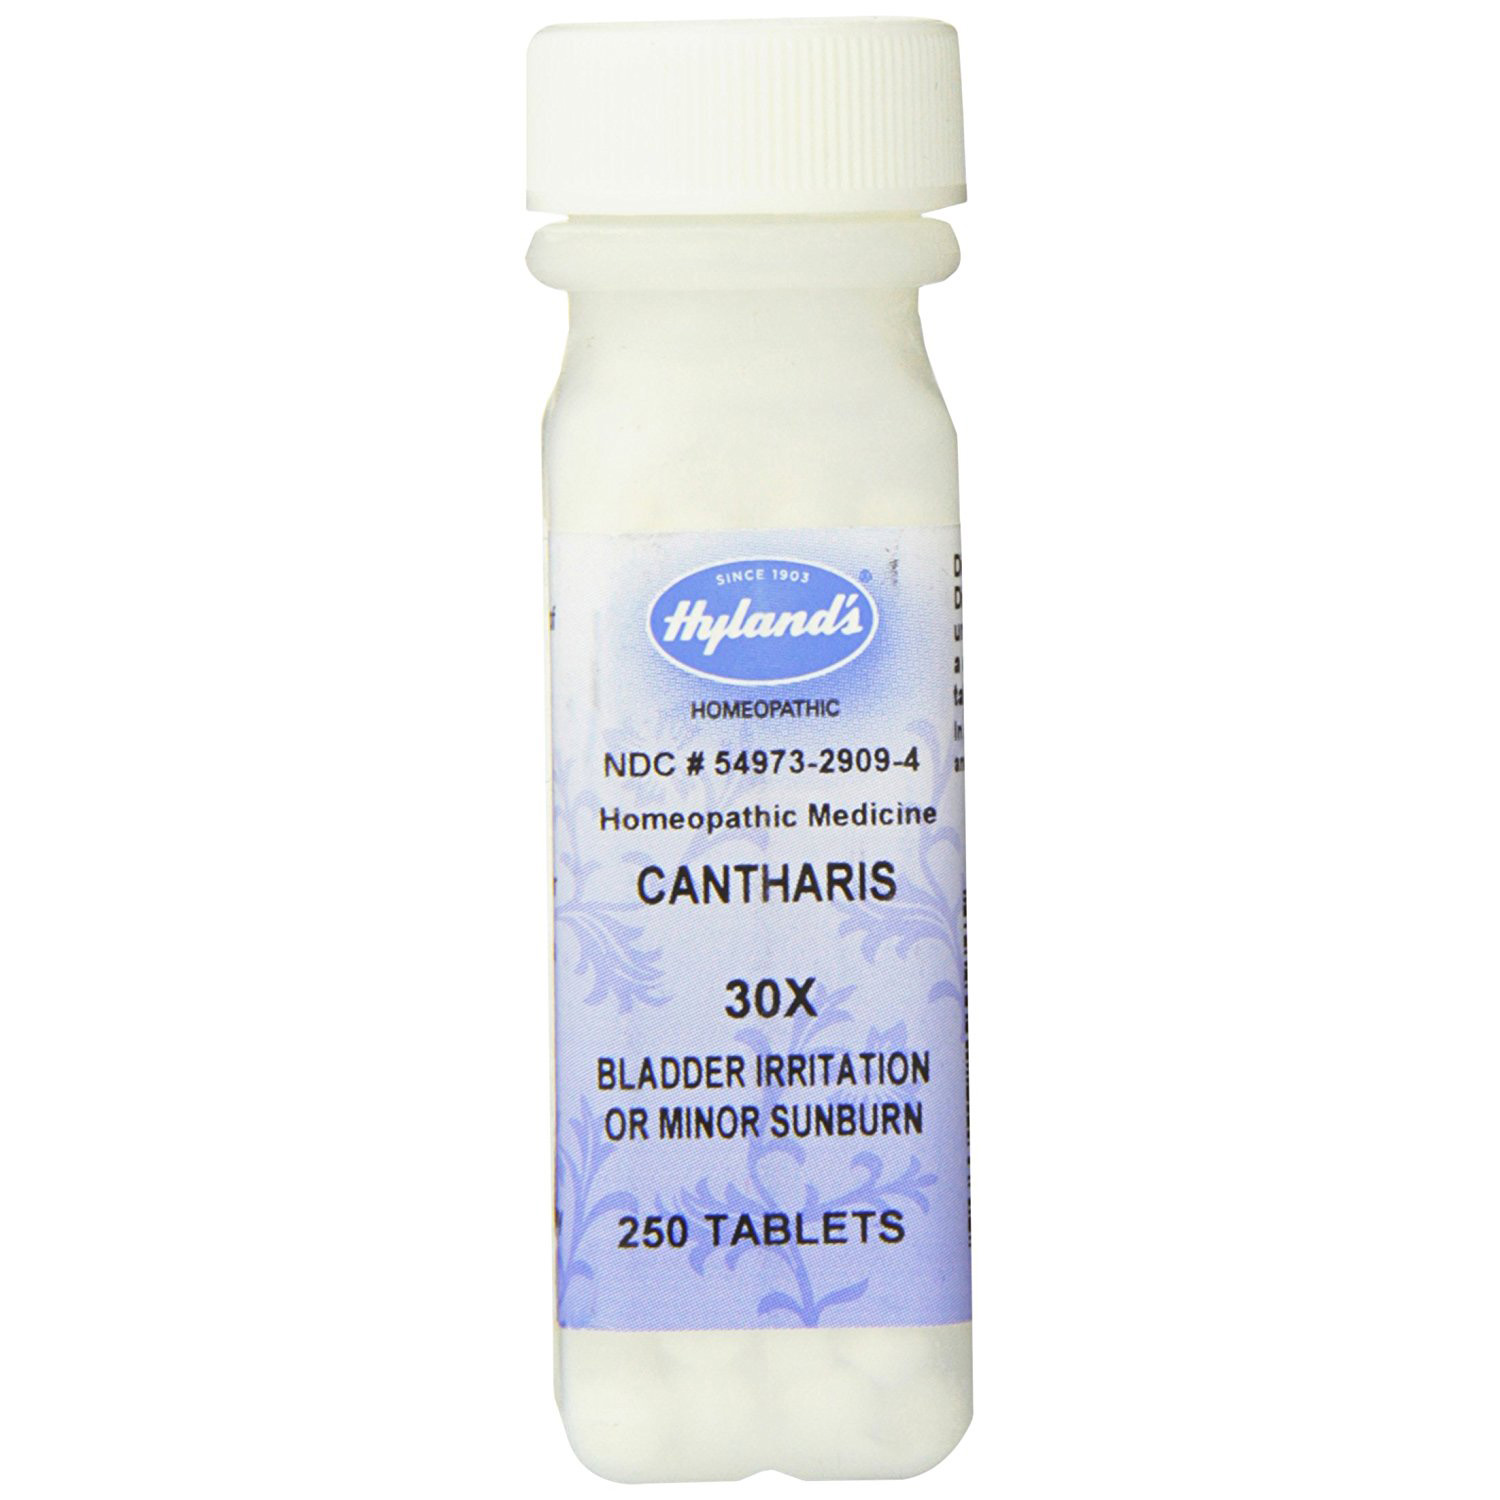 cantharis homeopathic remedies for uti